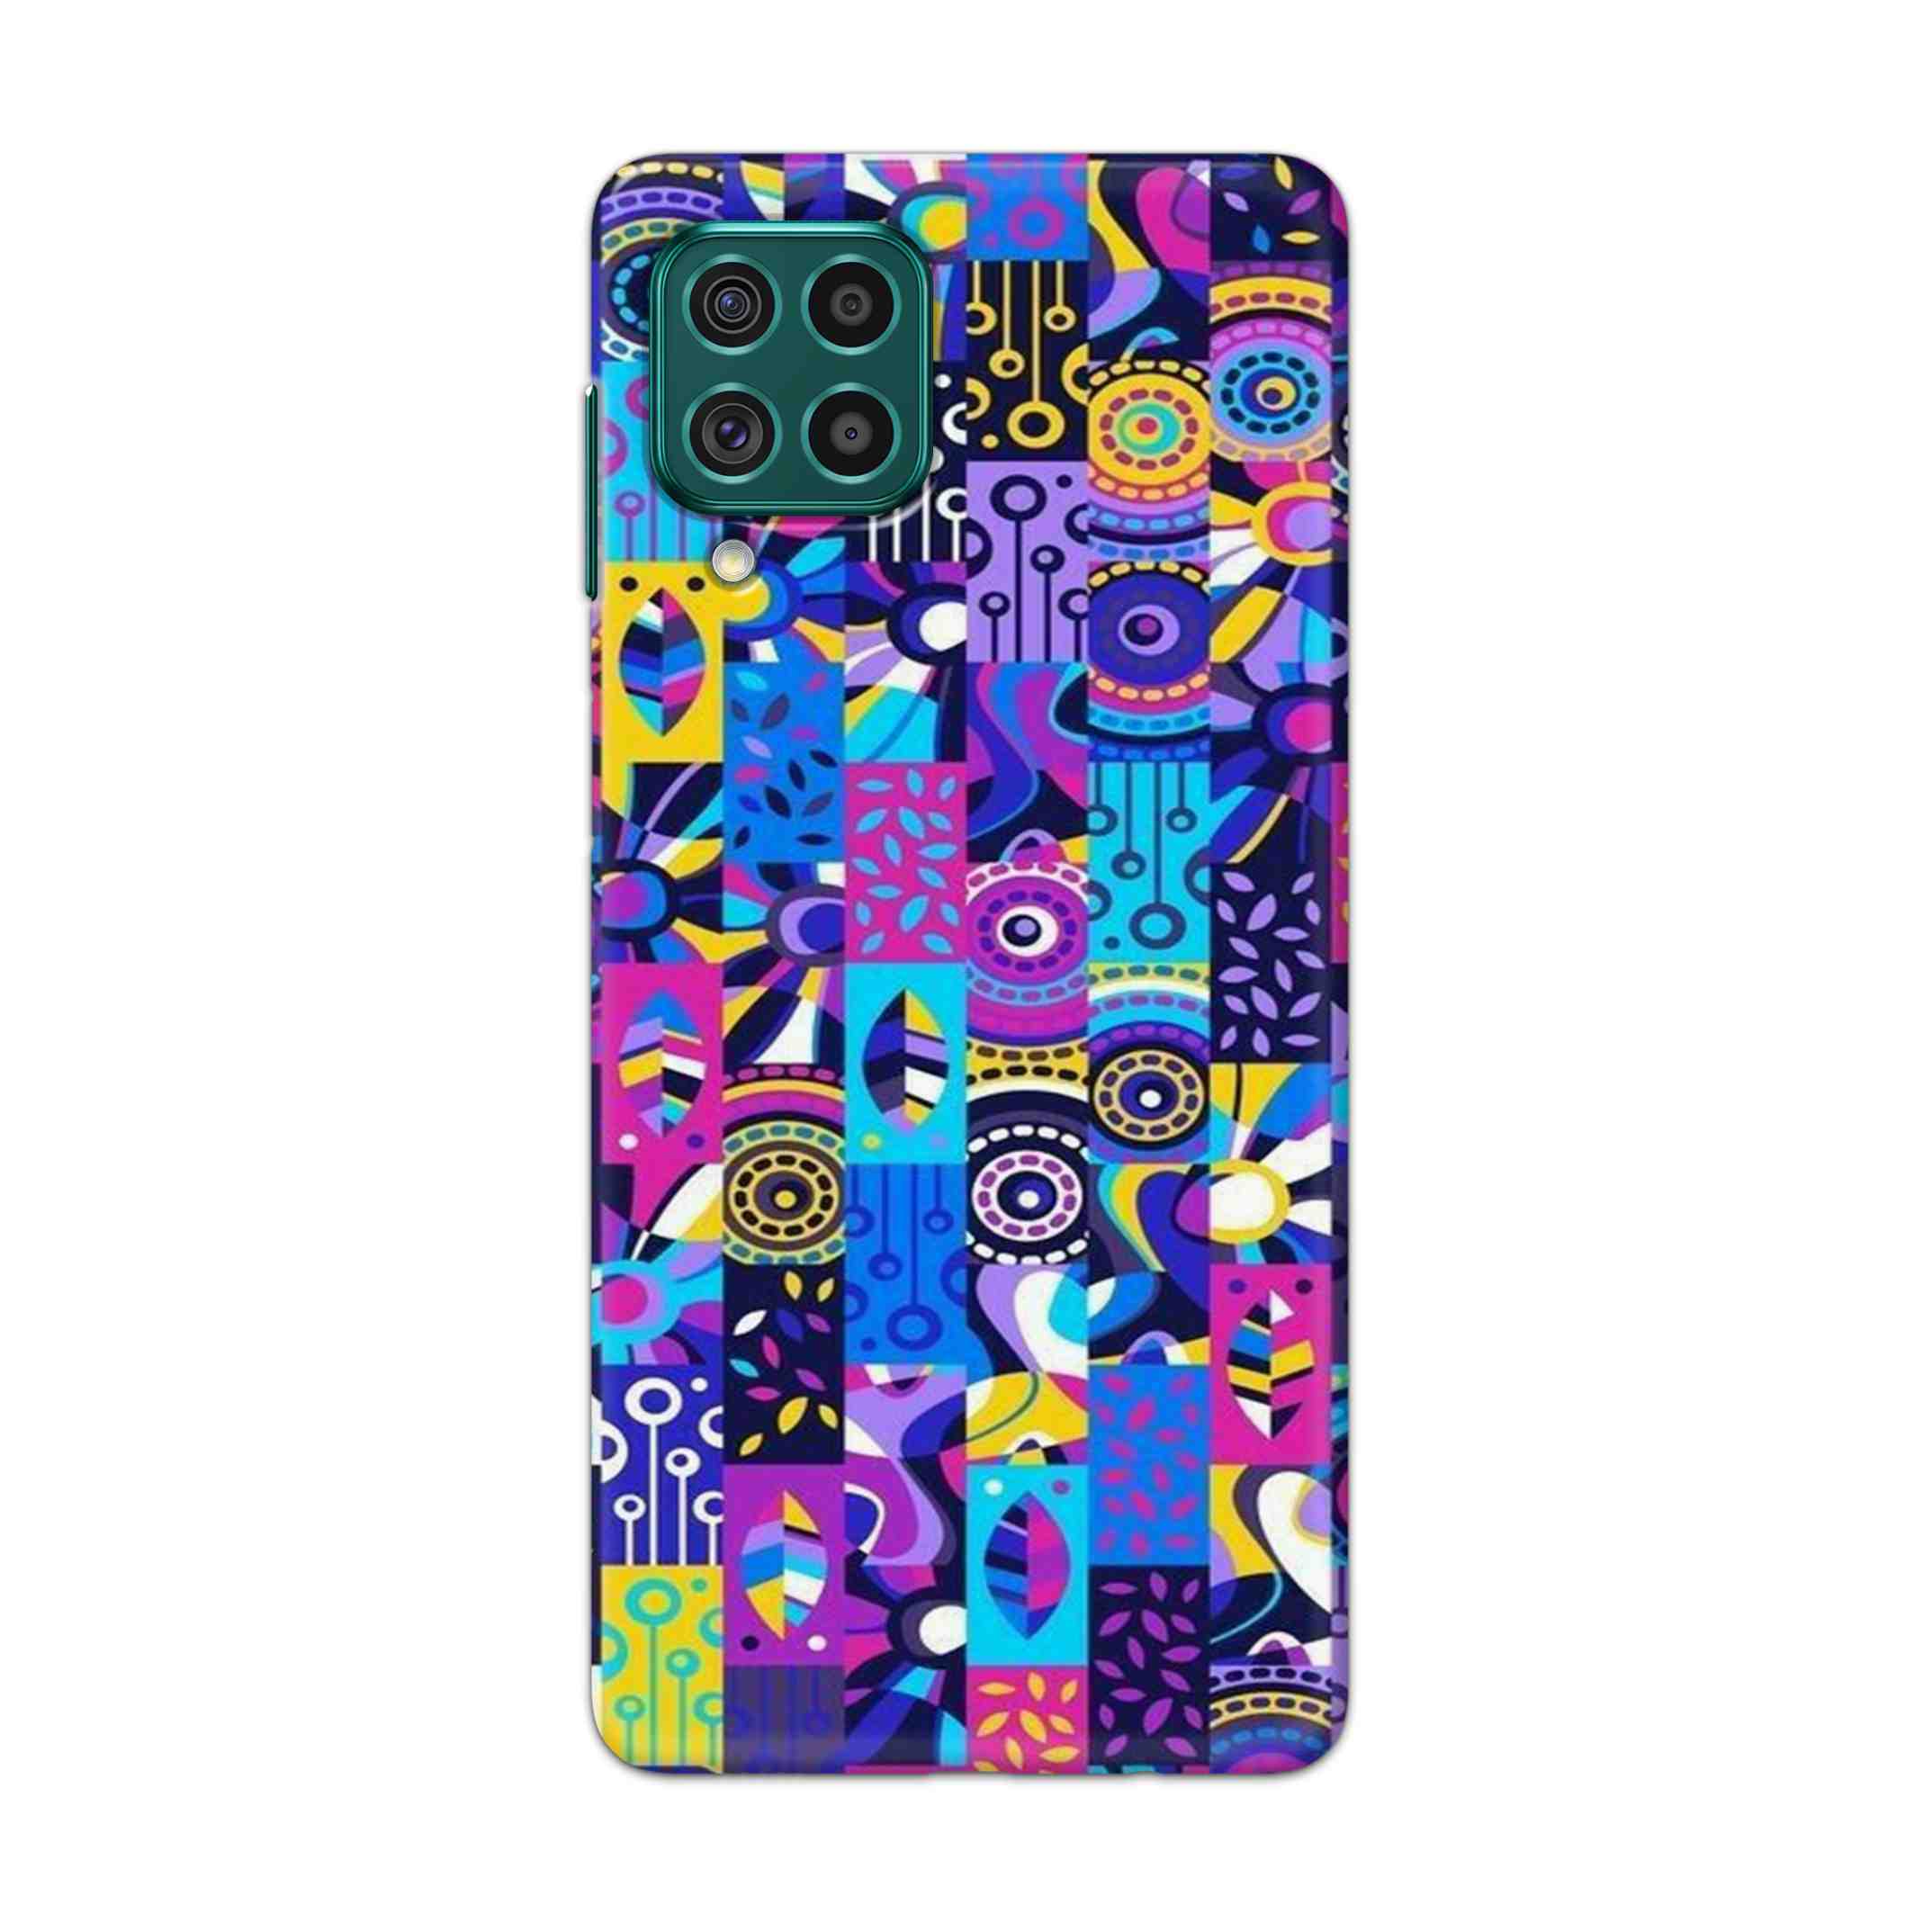 Buy Rainbow Art Hard Back Mobile Phone Case Cover For Galaxy F62 Online